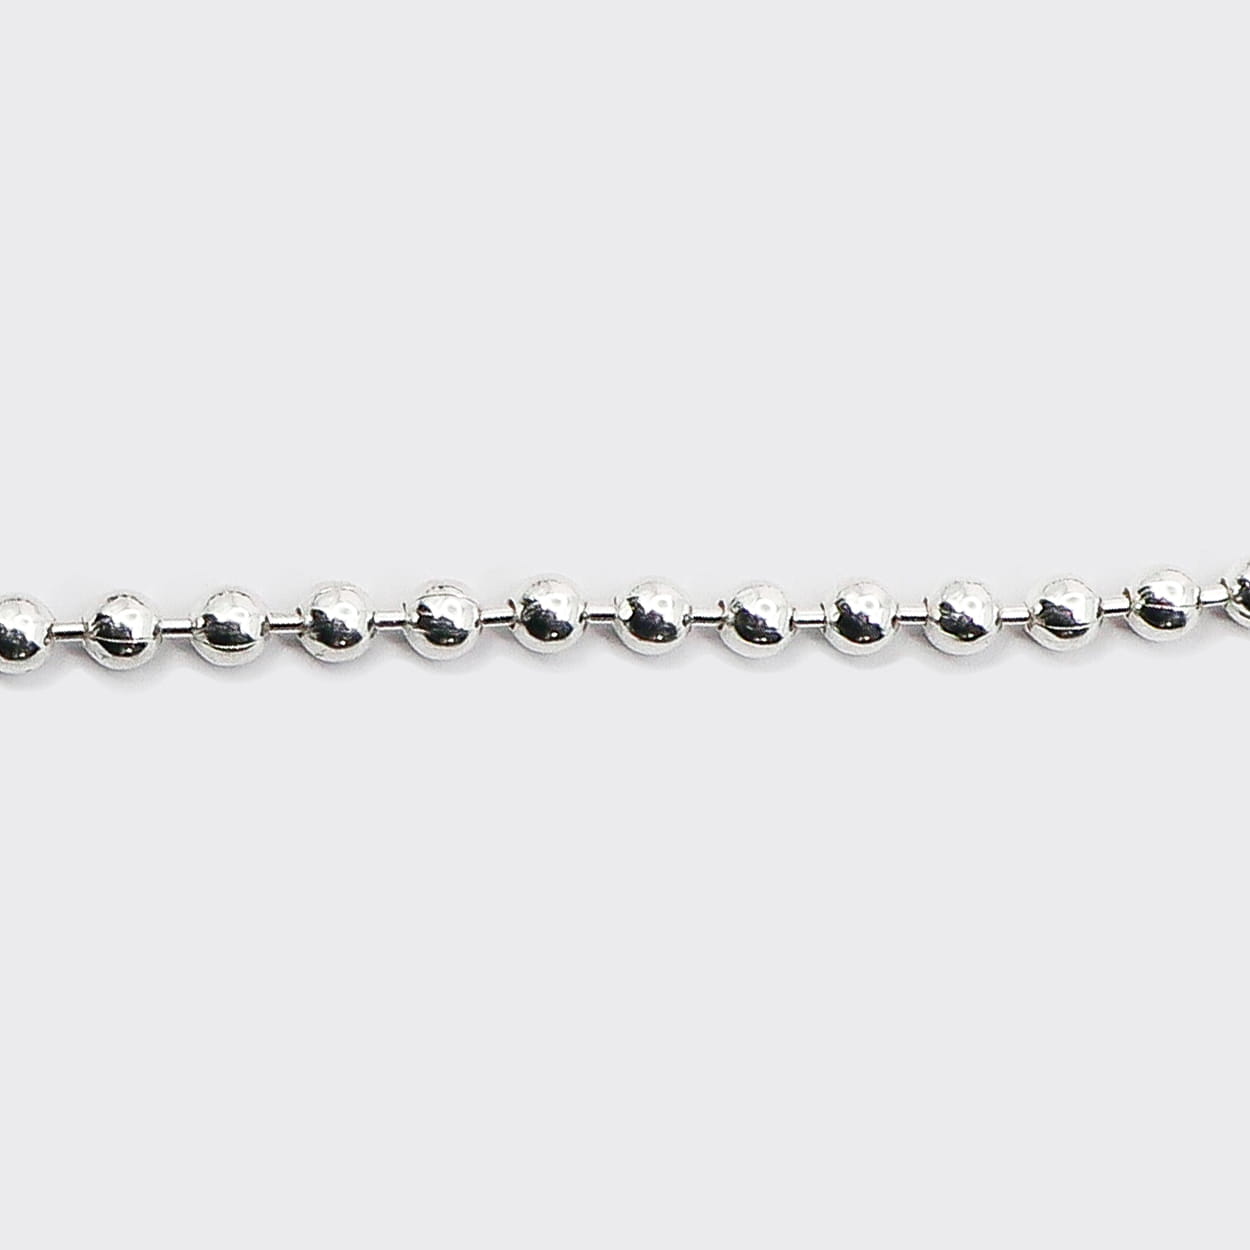 The beads bracelet is an elegant and unisex piece of jewelry, crafted in Italy and made of 925 Sterling Silver. Every jewelry is designed by Atelier Domingo's in France and is made to be worn by both men and women.